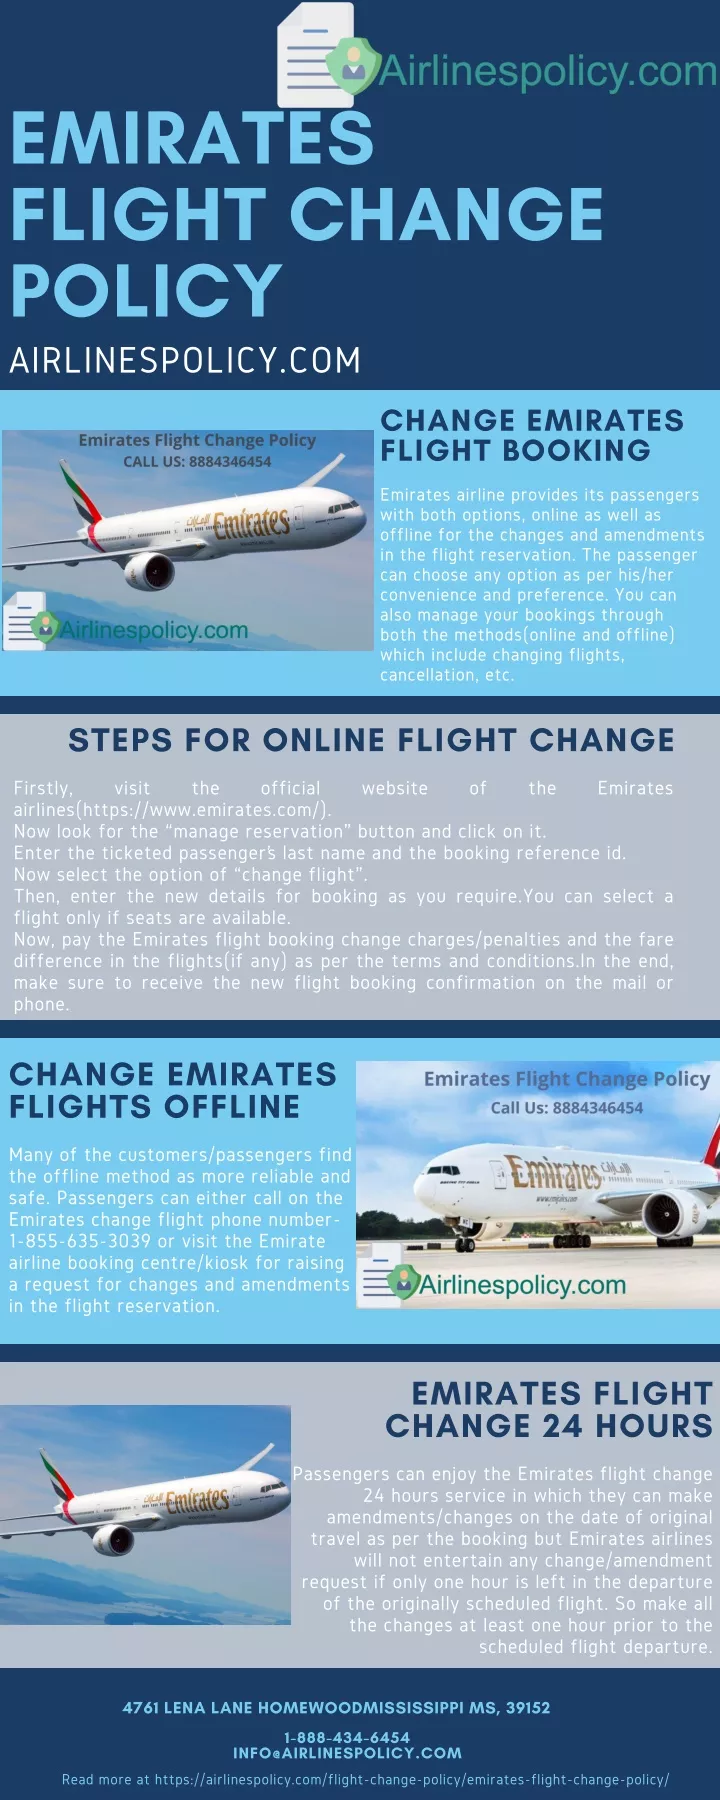 emirates flight change policy airlinespolicy com